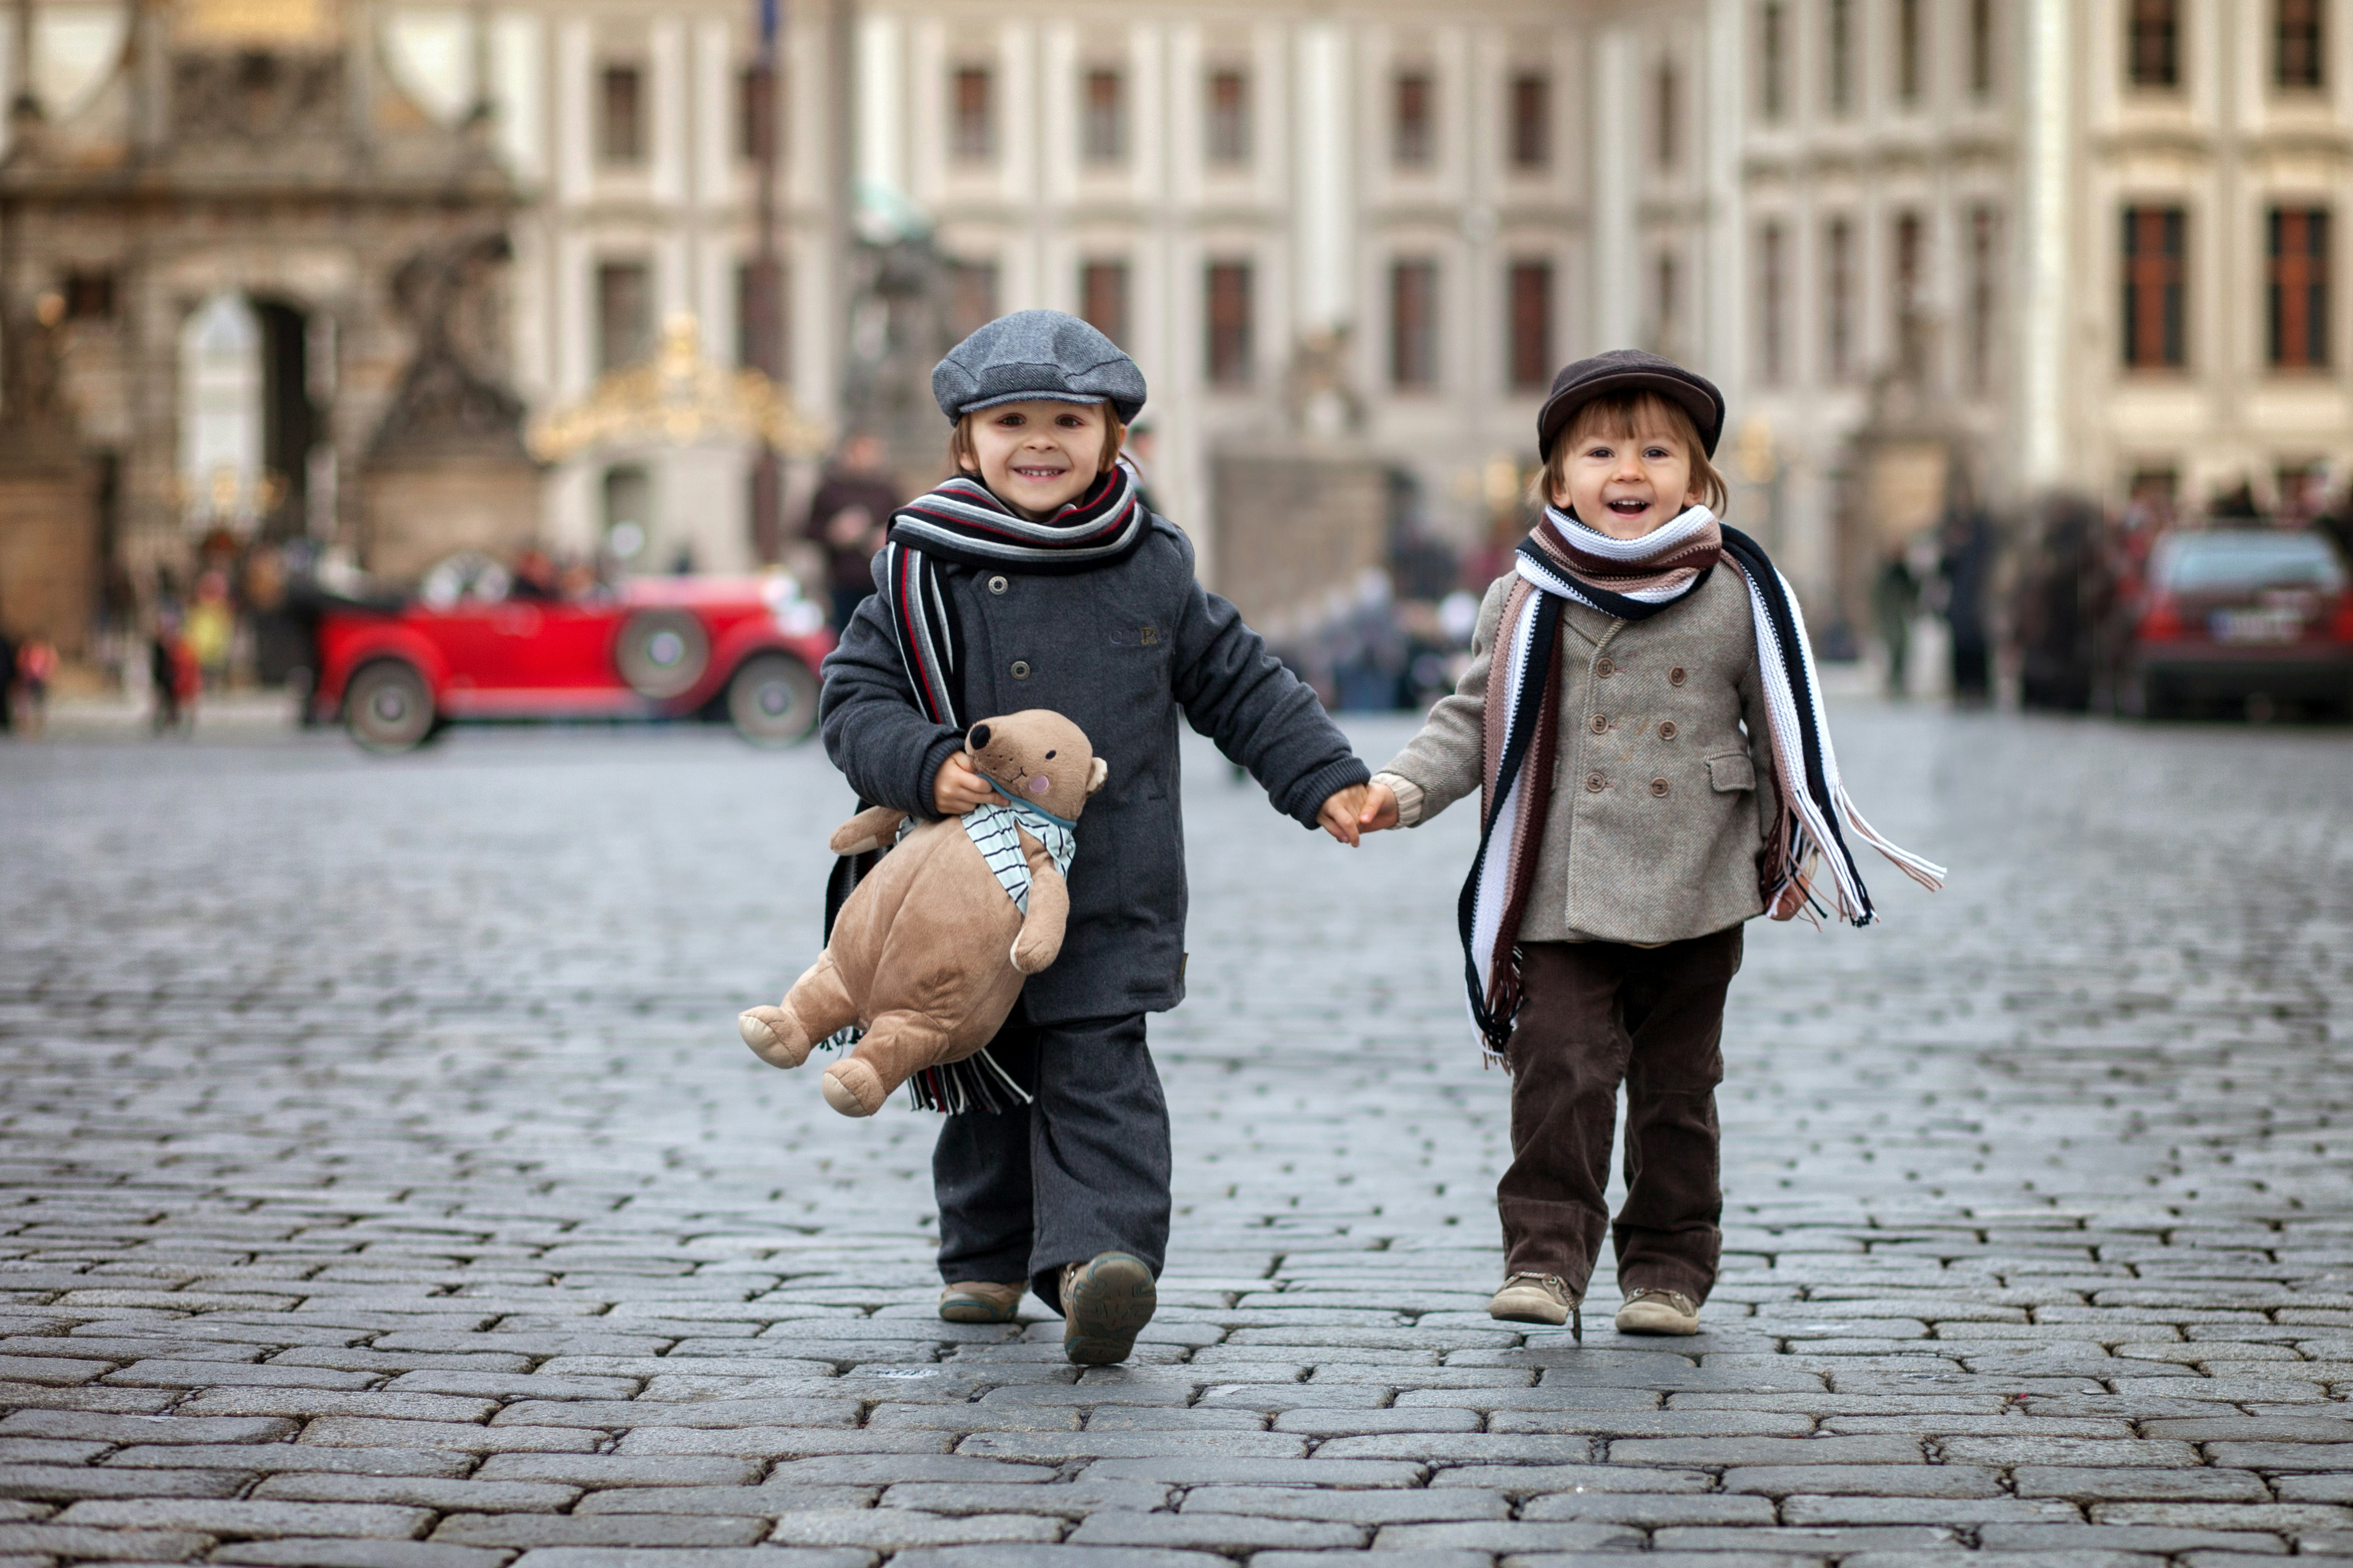 A pair of young brothers hold hands as they walk down a cobbled stone street in Old Town, Prague. The young boy on the left is holding a stuffed bear.